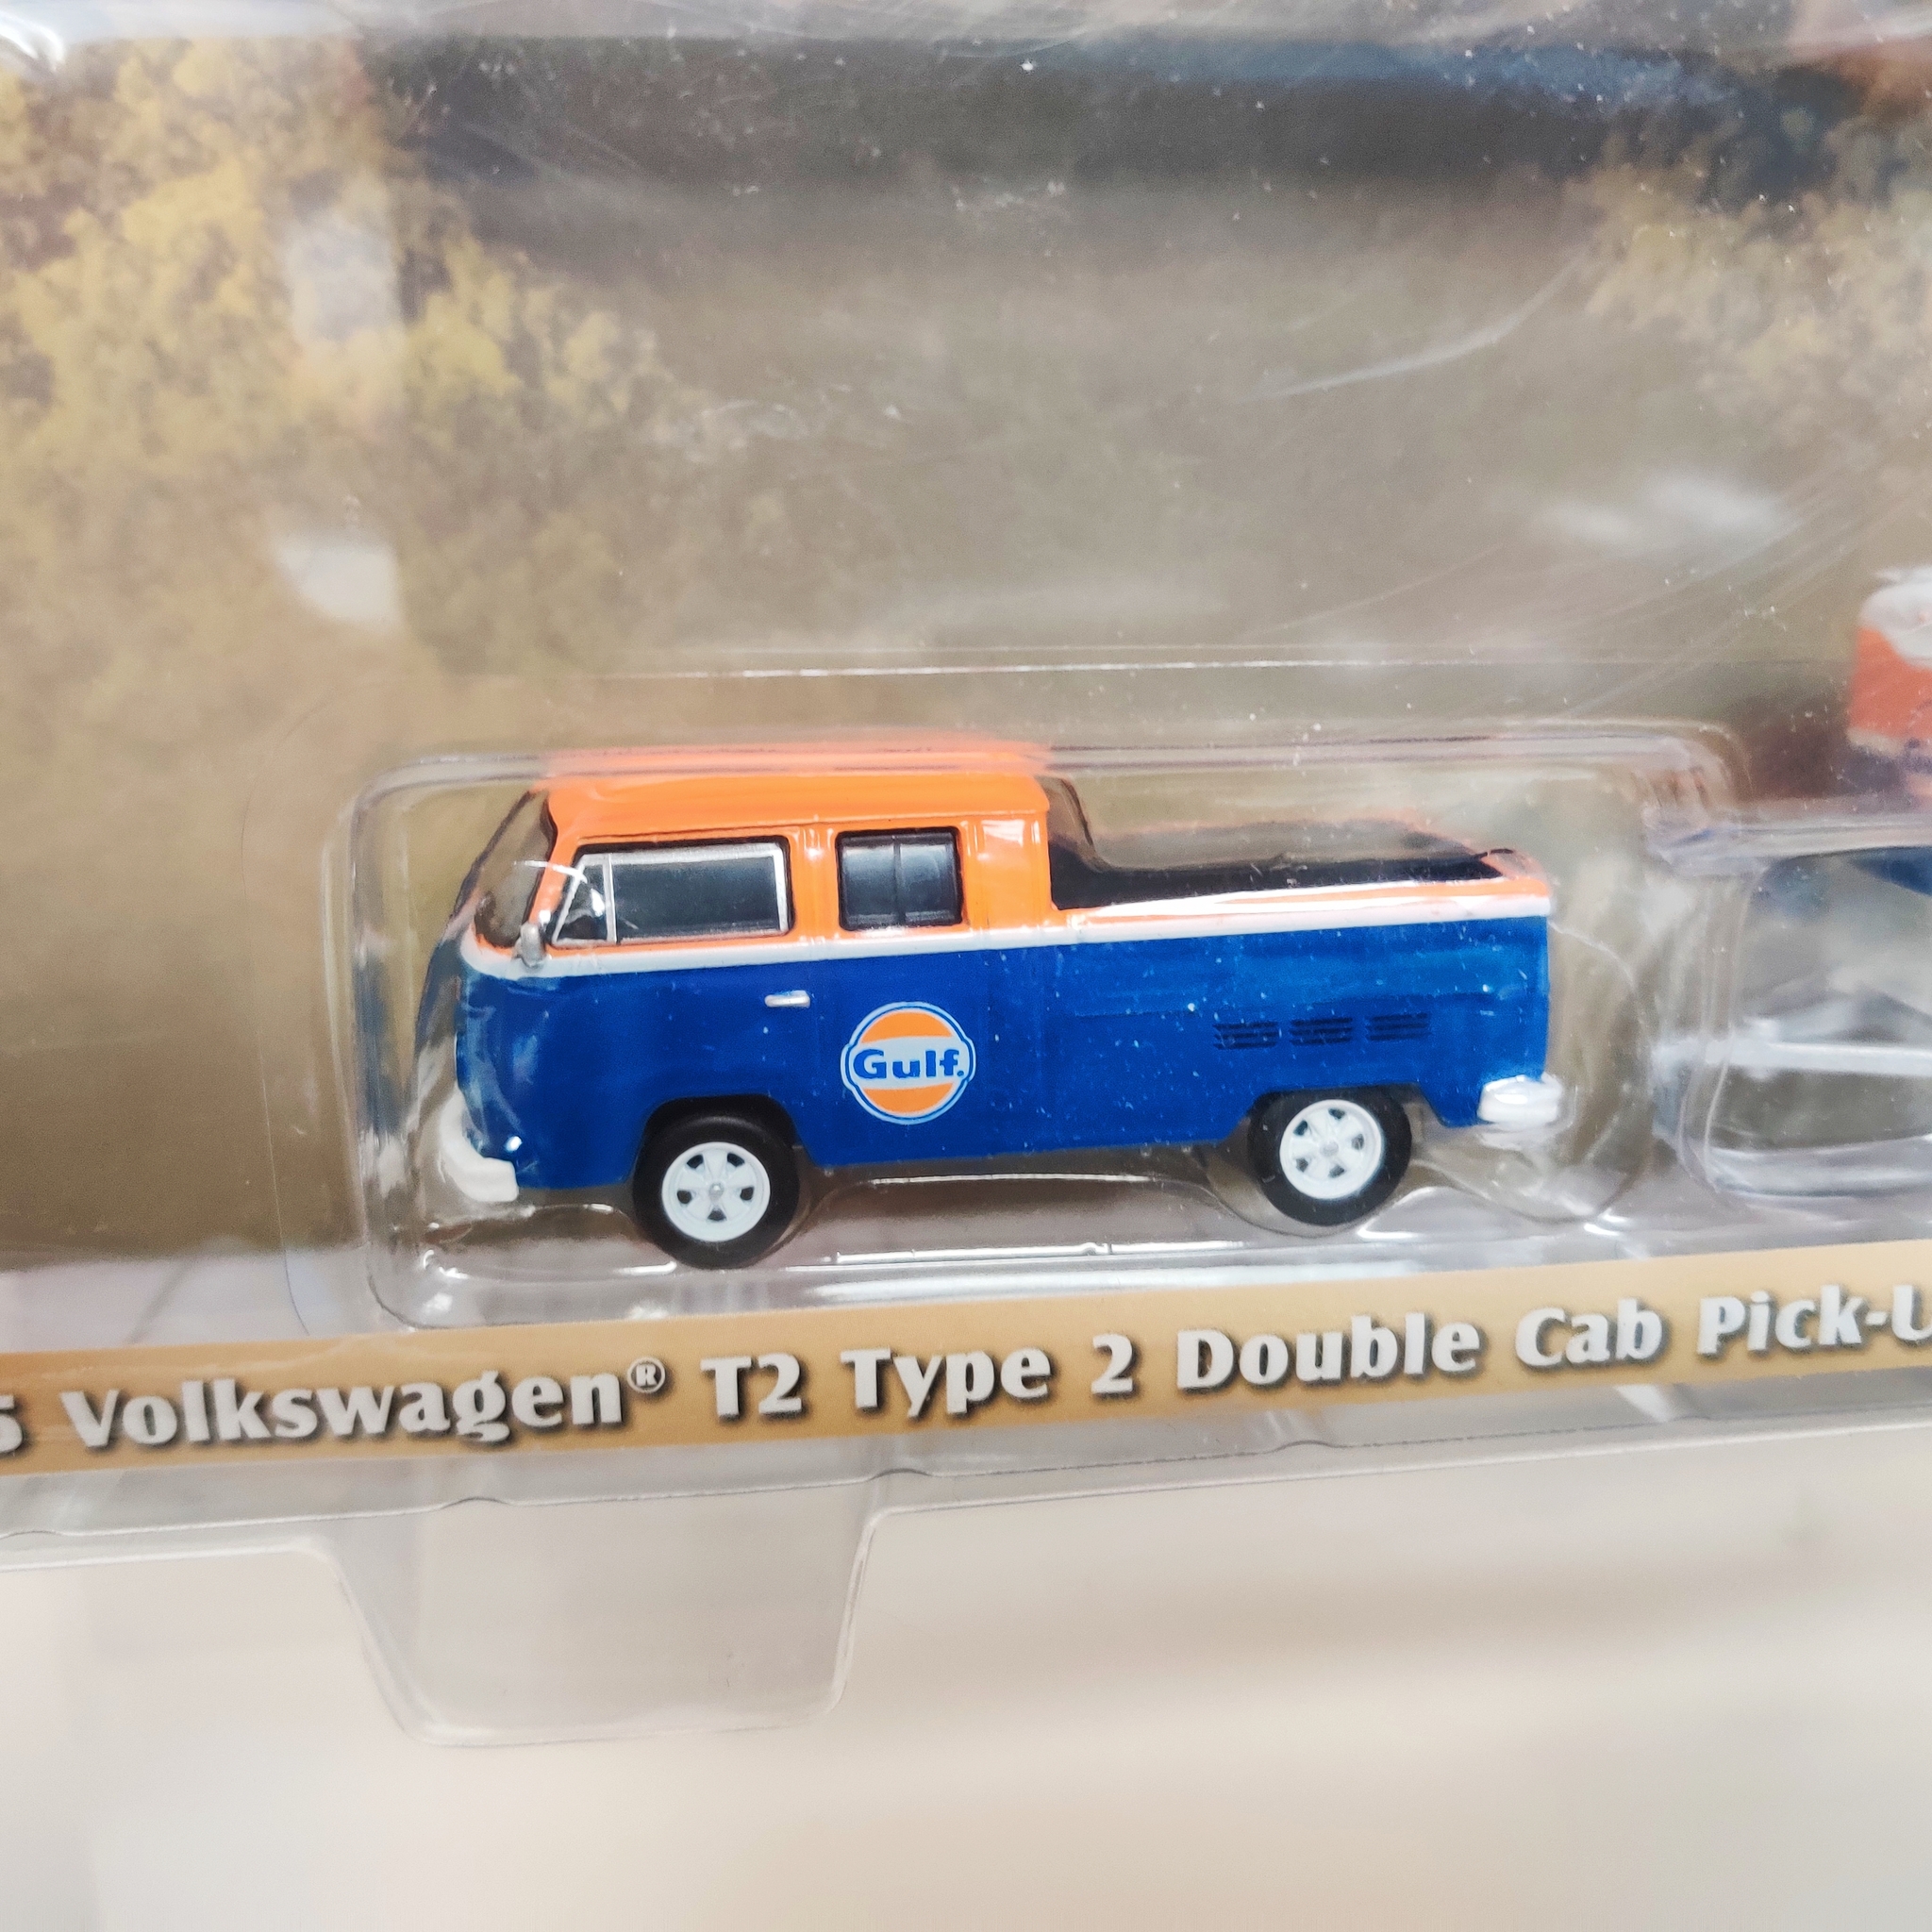 Skala 1/64 Greenlight "Hitch & Tow" 1975 "GULF" Volkswagen T2 Type2 Double cab Pick-Up w Small Cargo Trailer S28